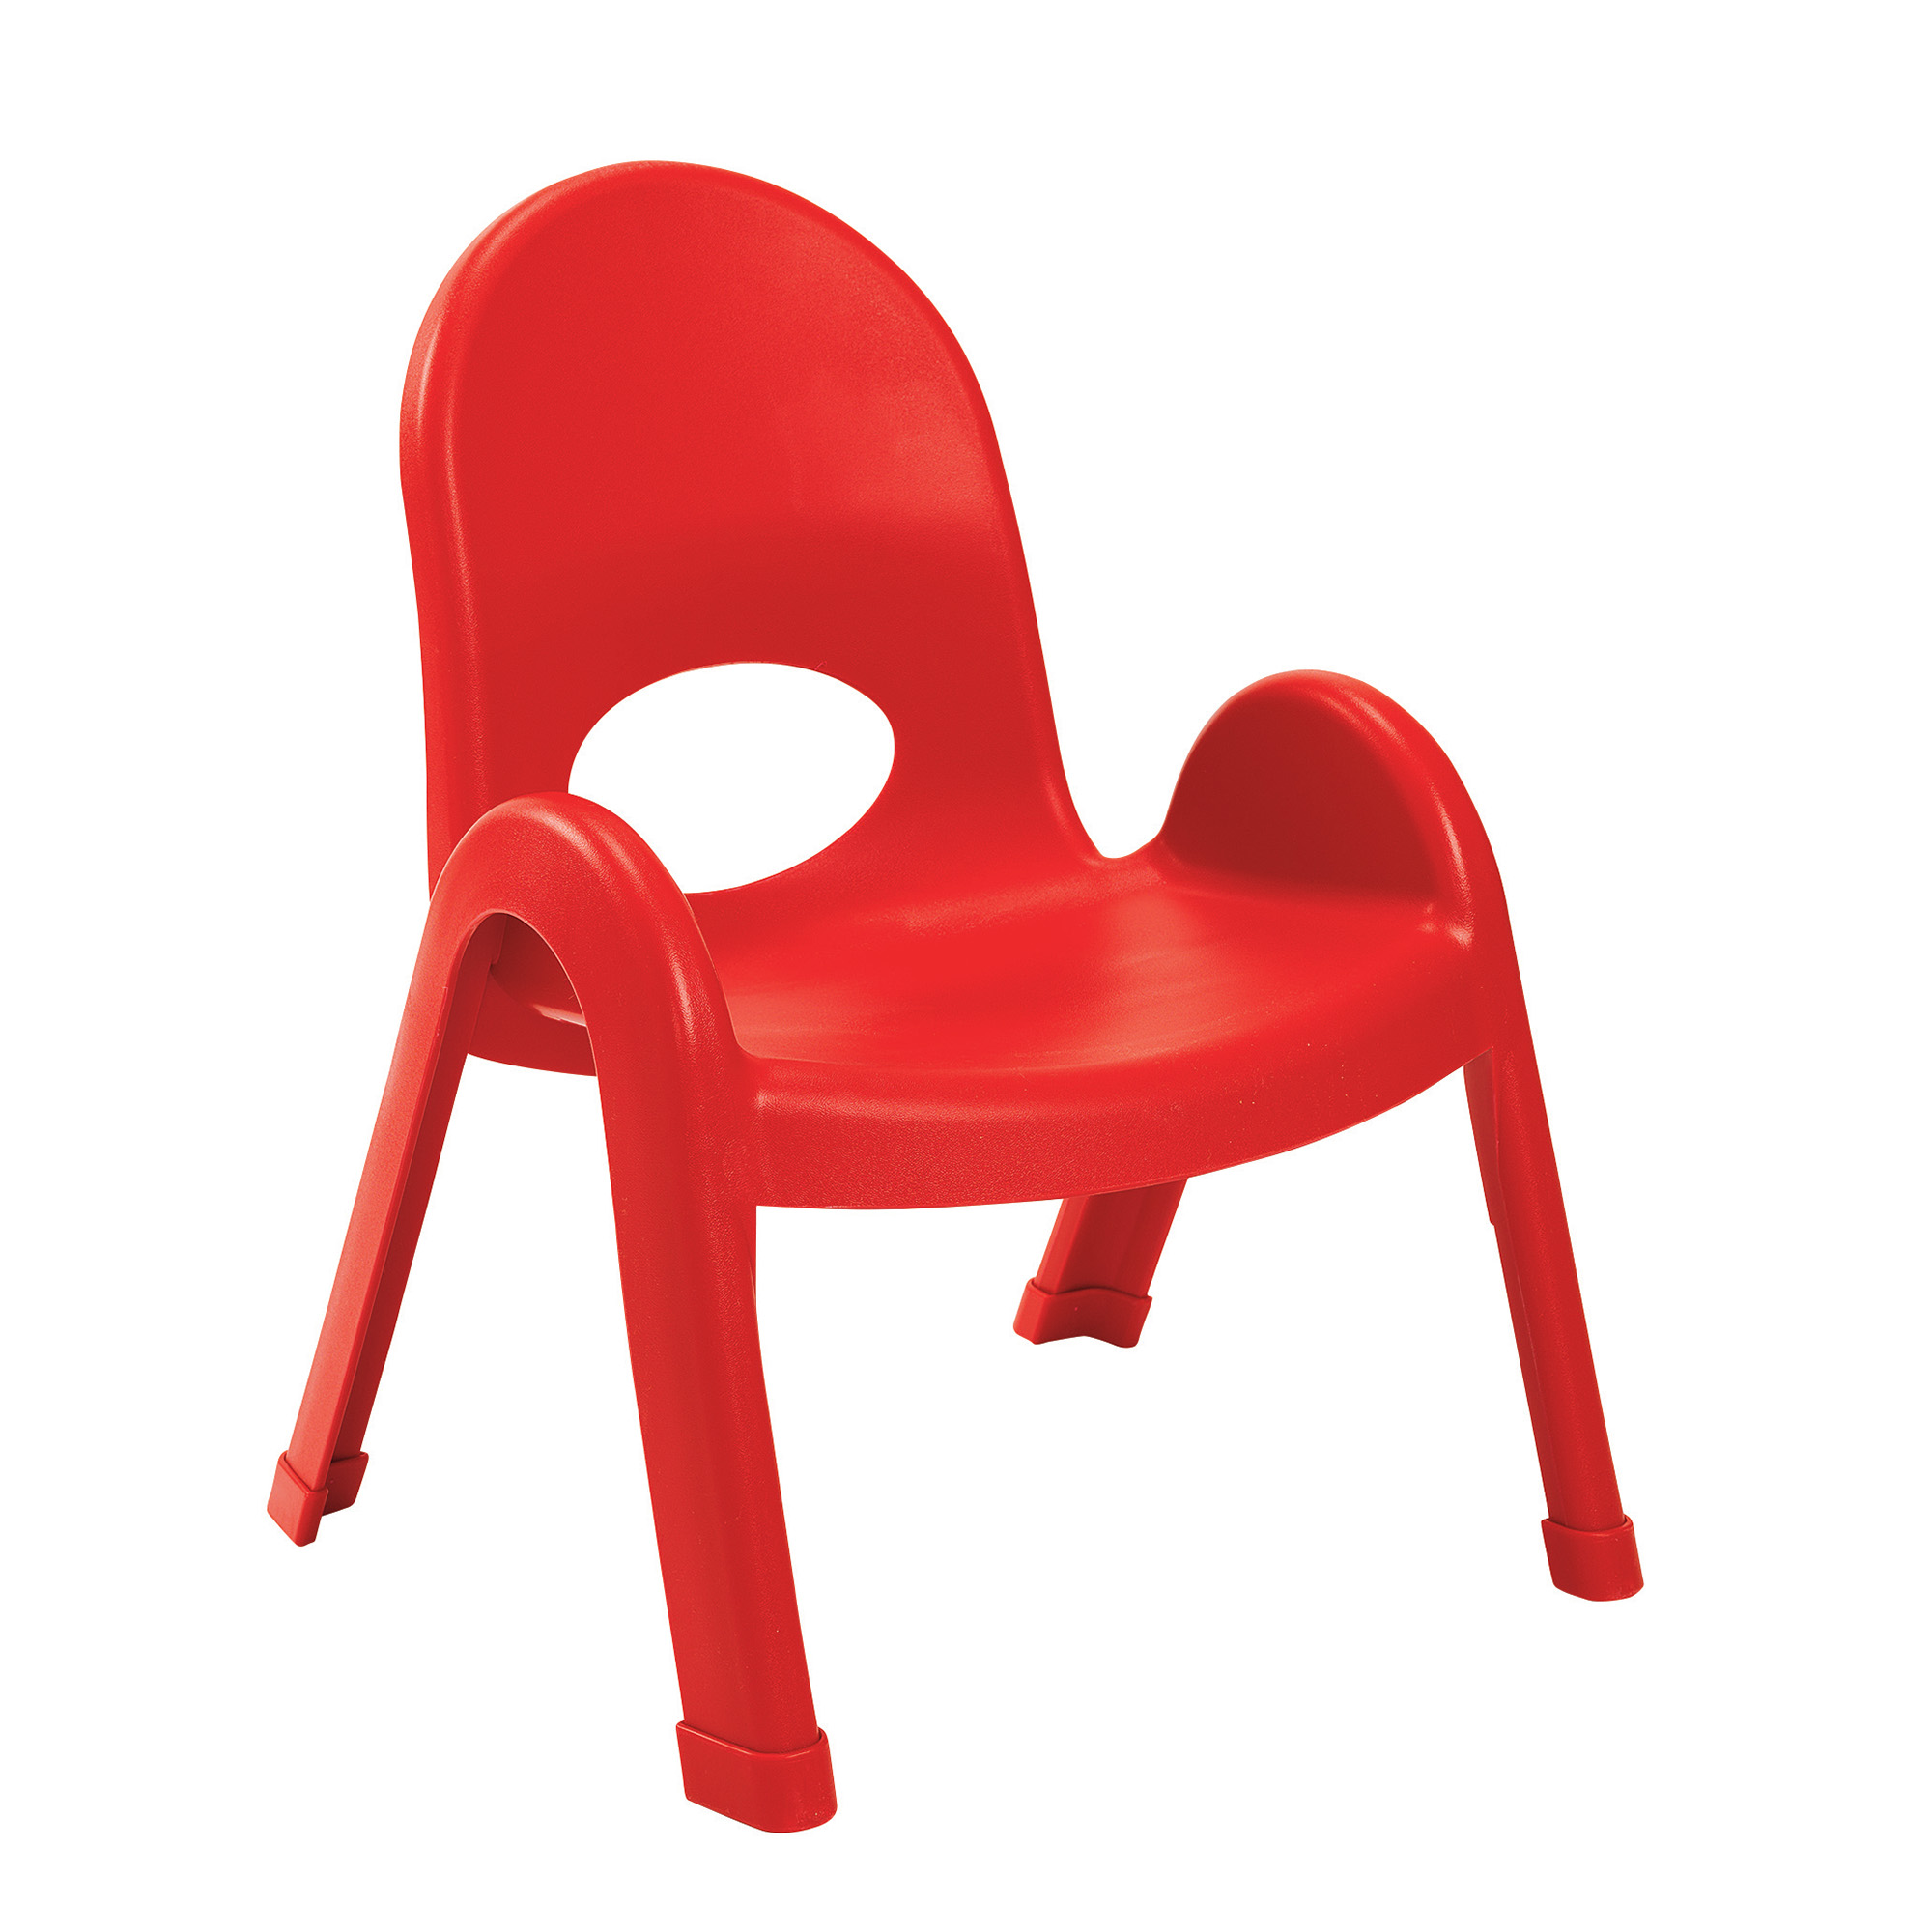 Value Stack™ 23 cm  Chair - Candy Apple Red